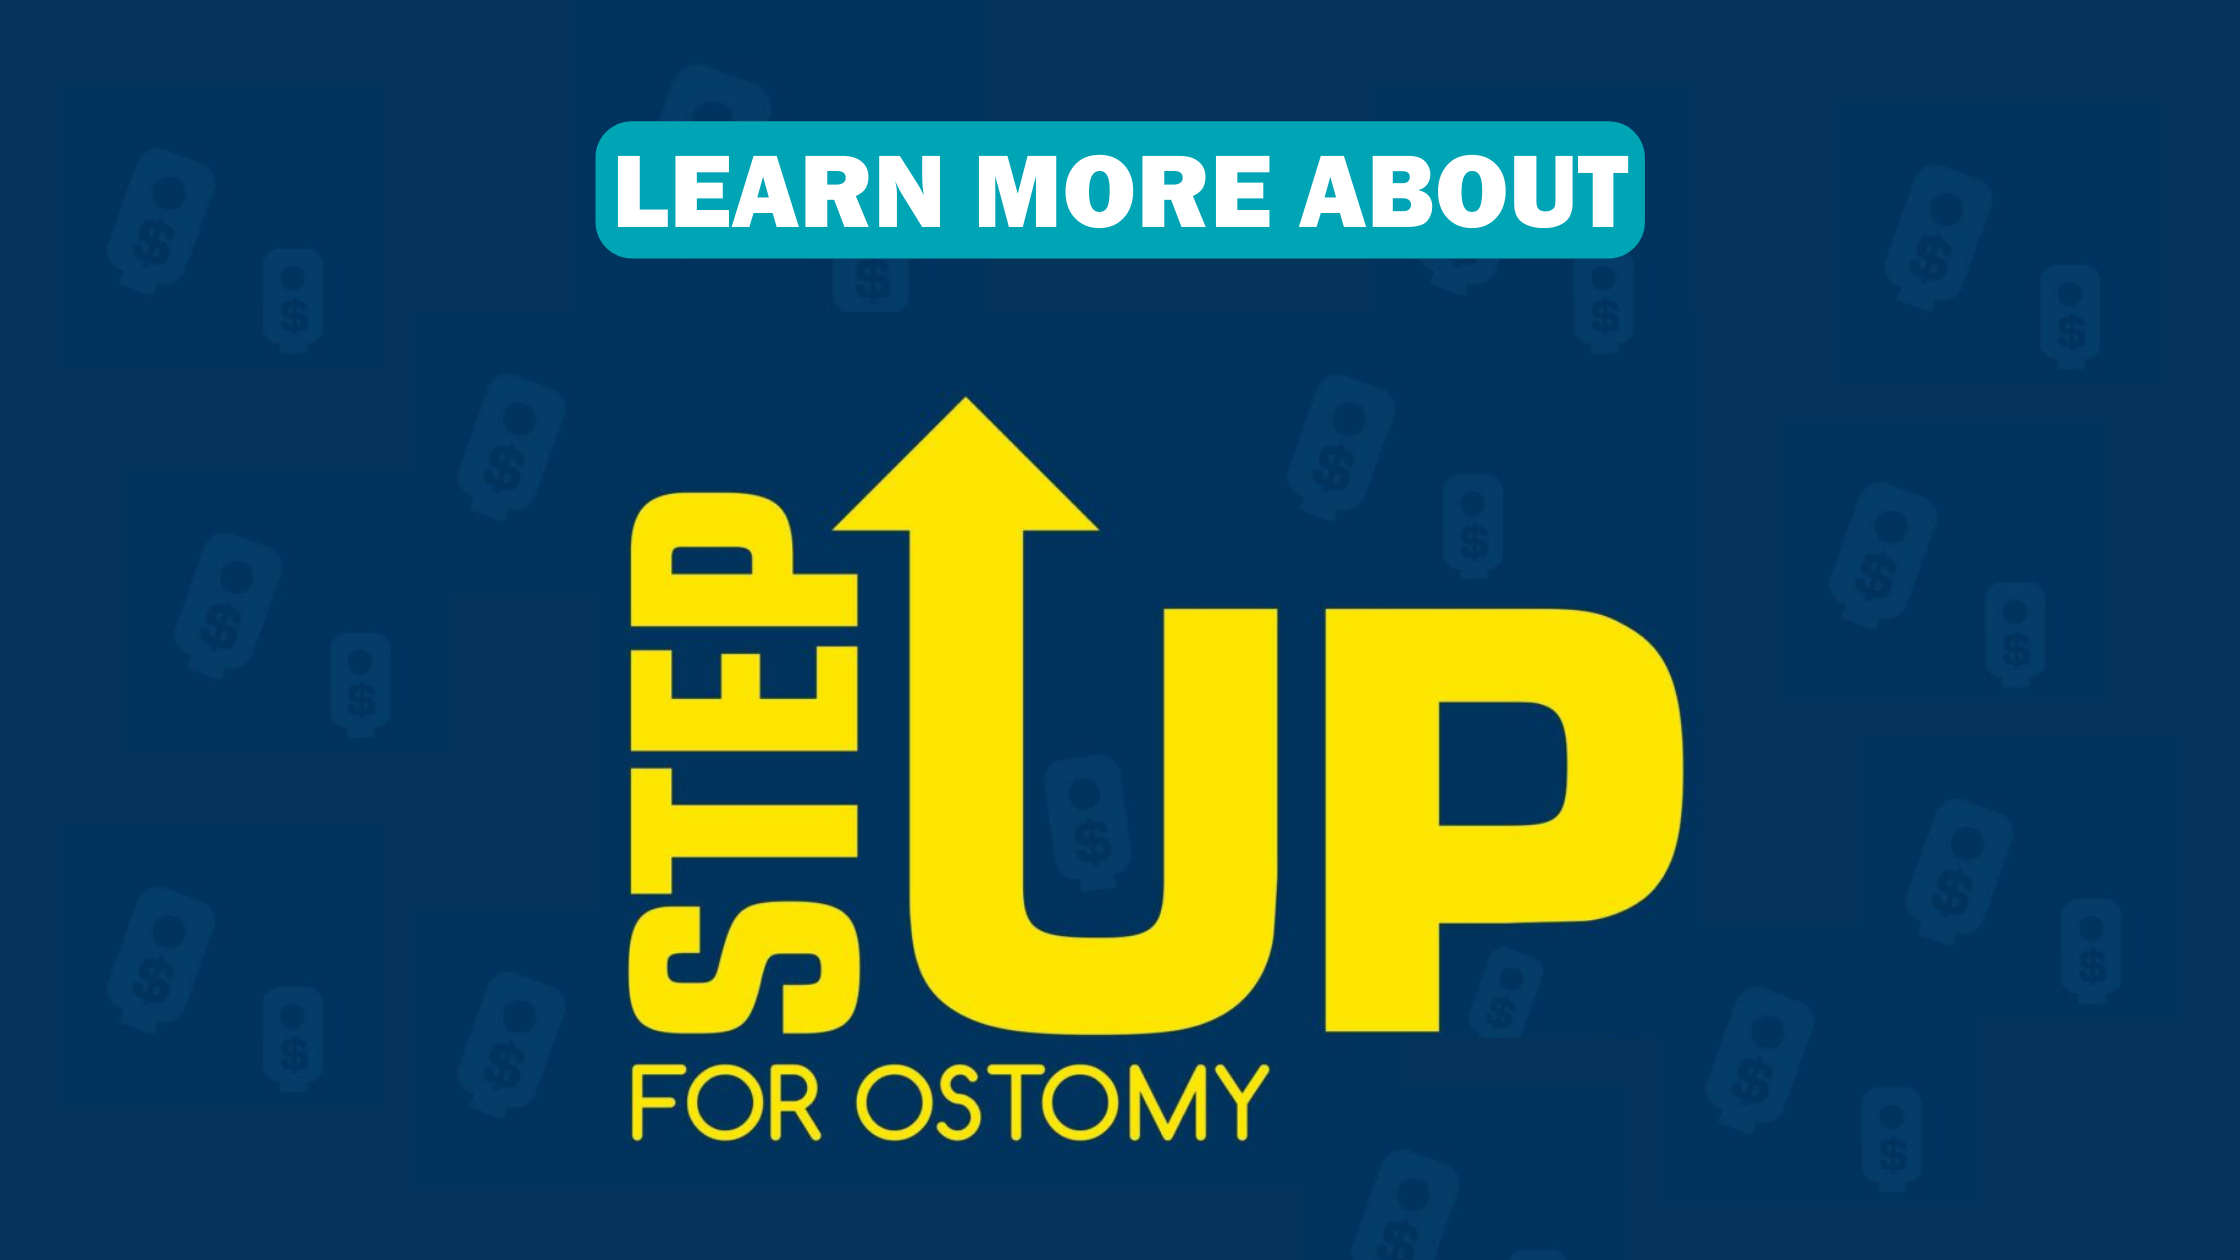 Step Up for Ostomy is Back!